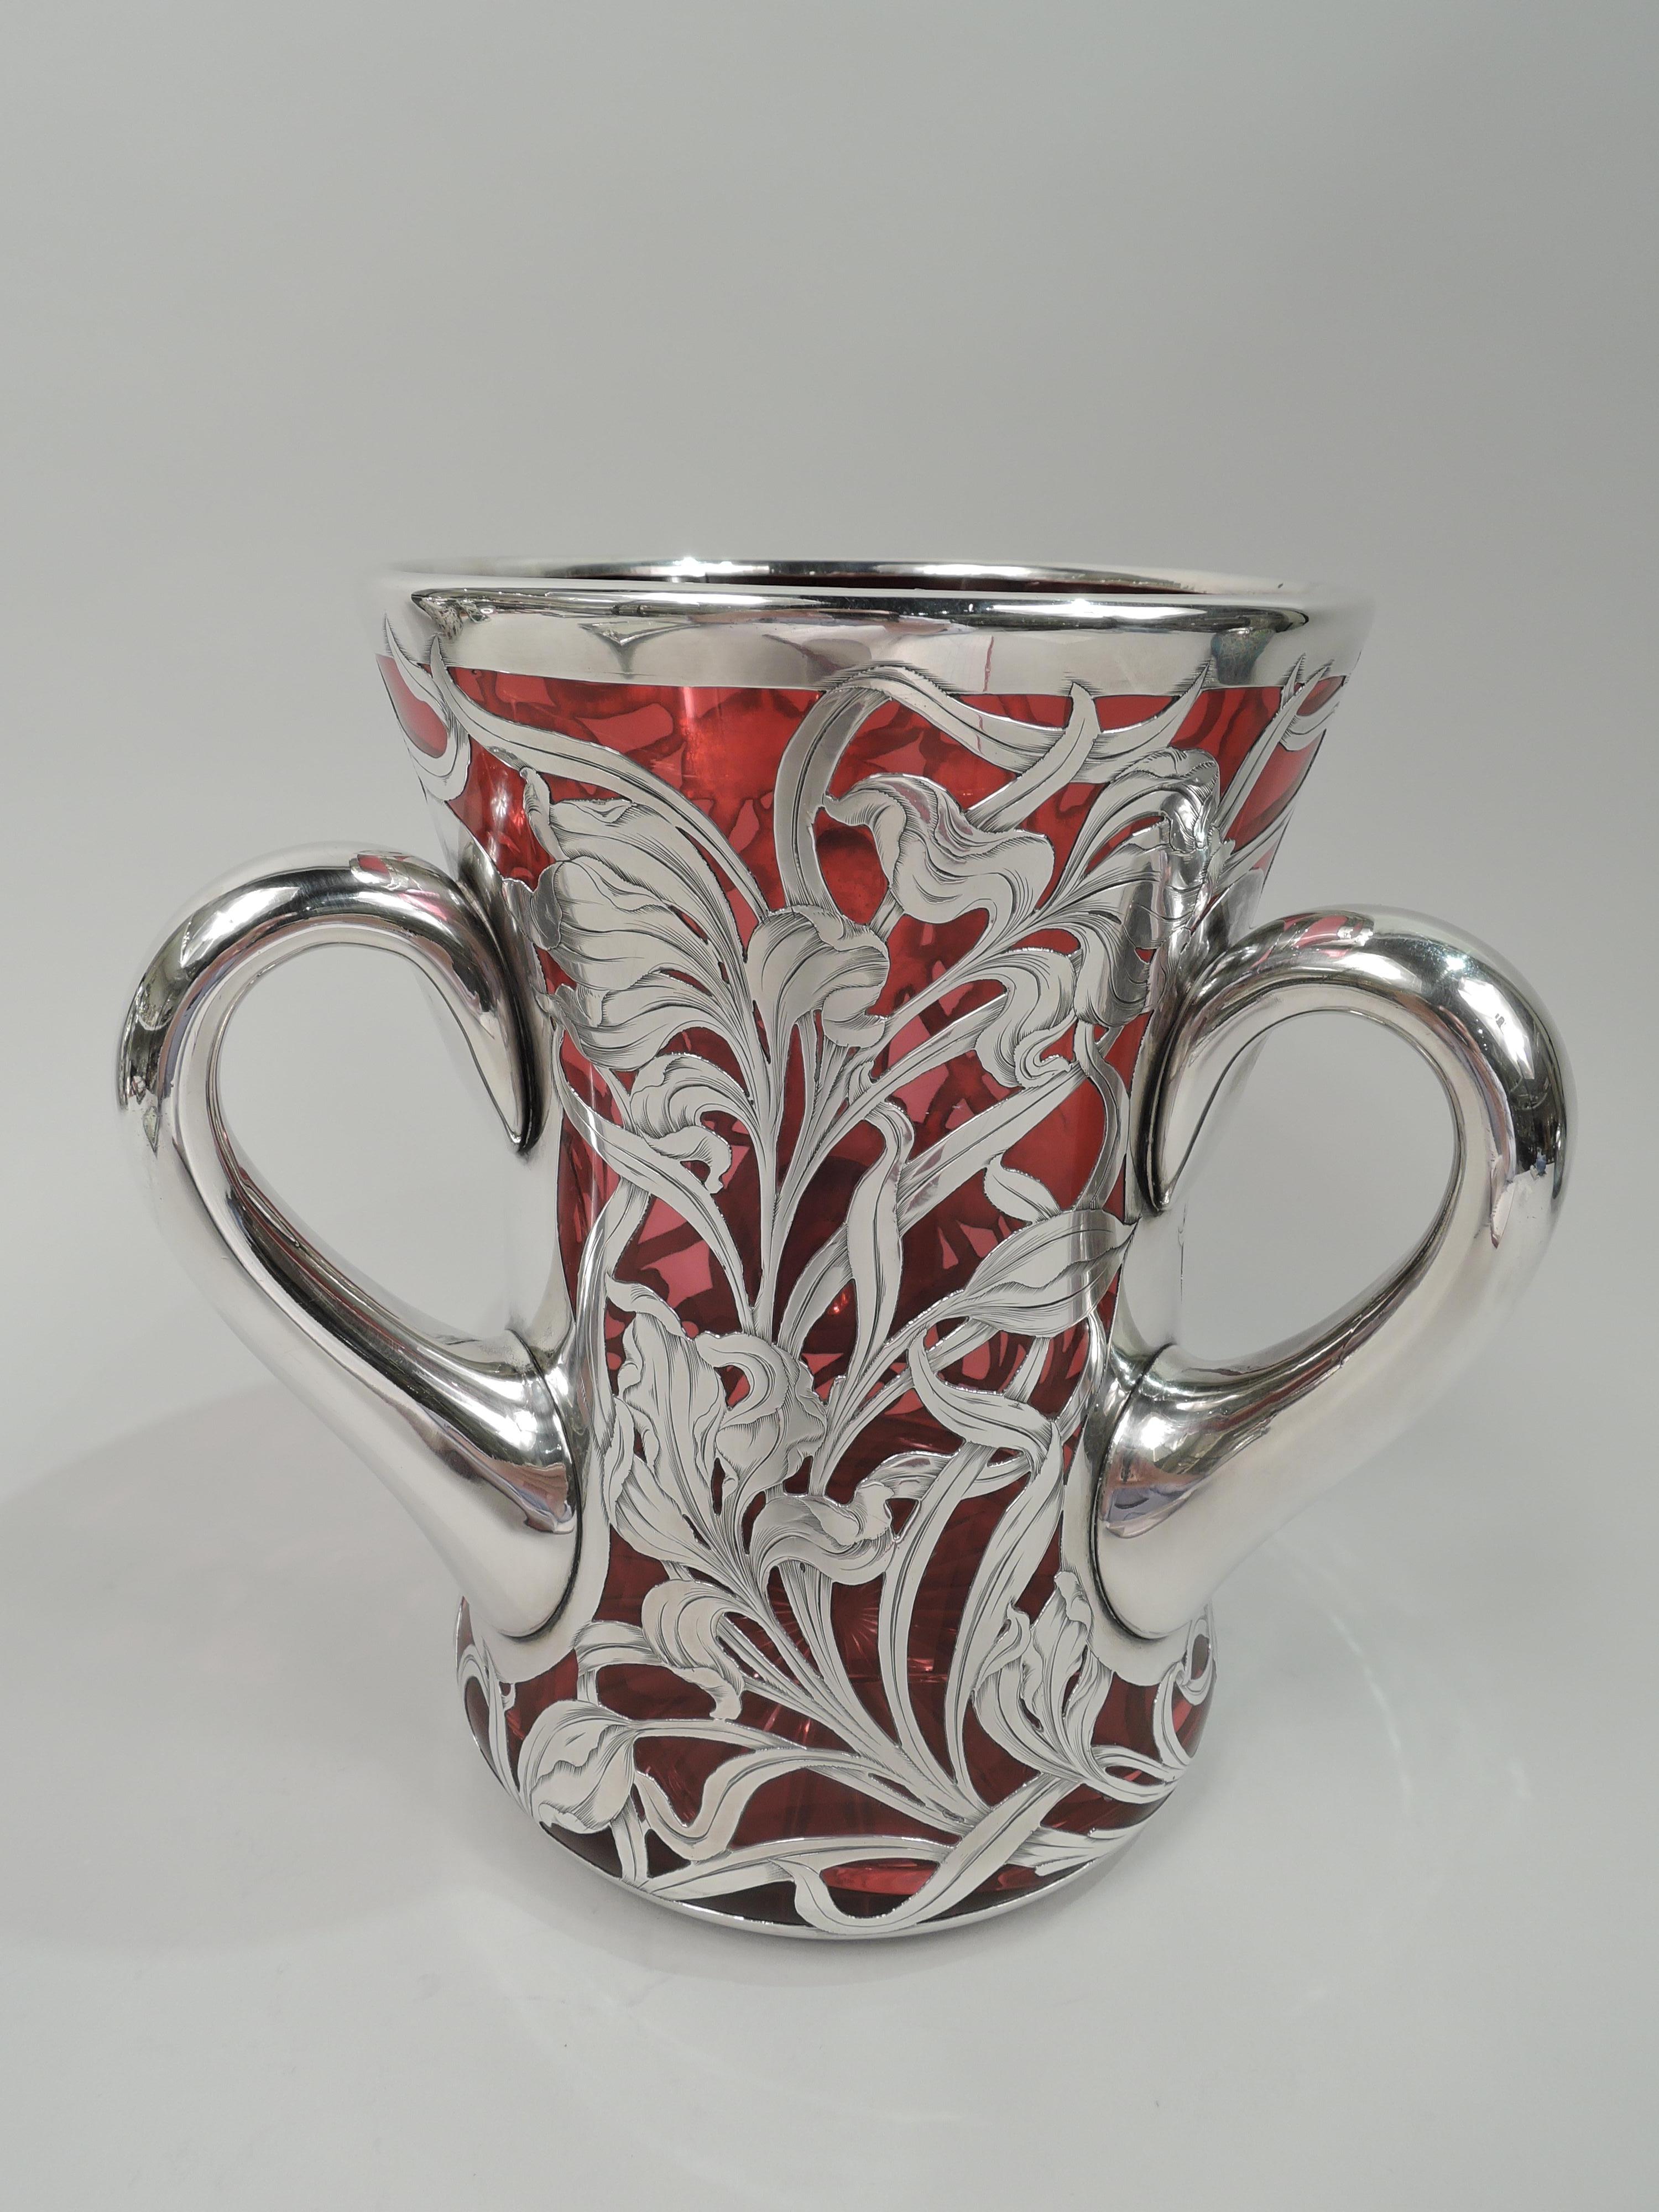 Gorgeous turn-of-the-century American Art Nouveau glass loving cup with engraved silver overlay. Waisted cylinder with looping c-scroll silver handles. Clear-cut star on underside. Overlay in form of wildly windswept and entwined iris flowers and